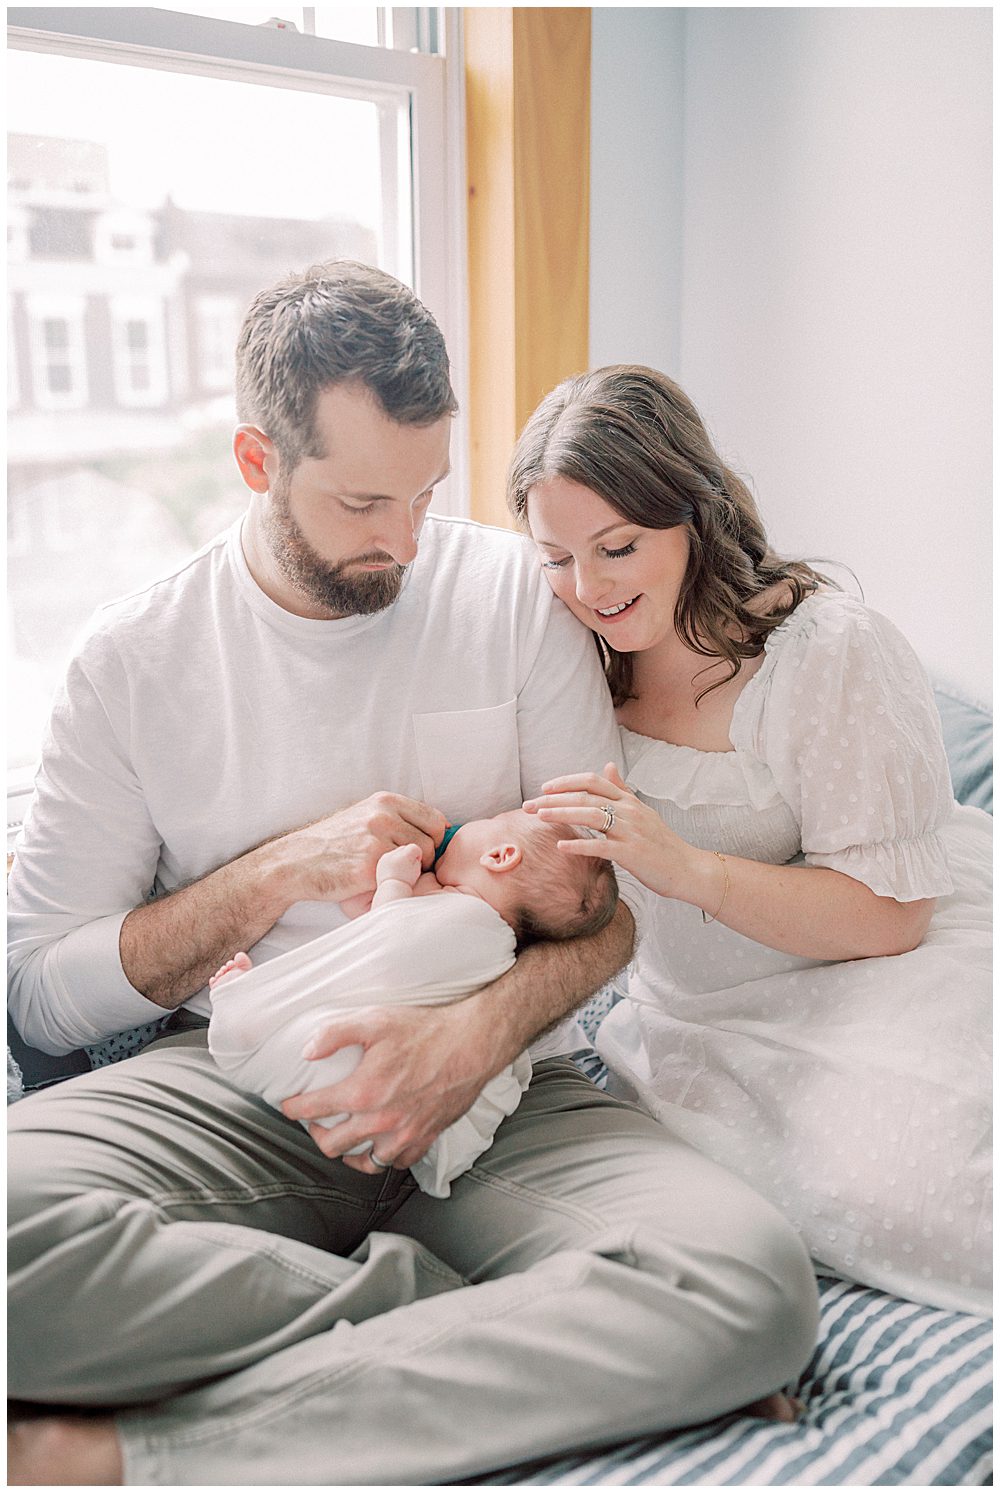 Dad sits on bed and holds his newborn son while wife leans against him, gently rubbing newborn's head during their Capital Hill newborn session.